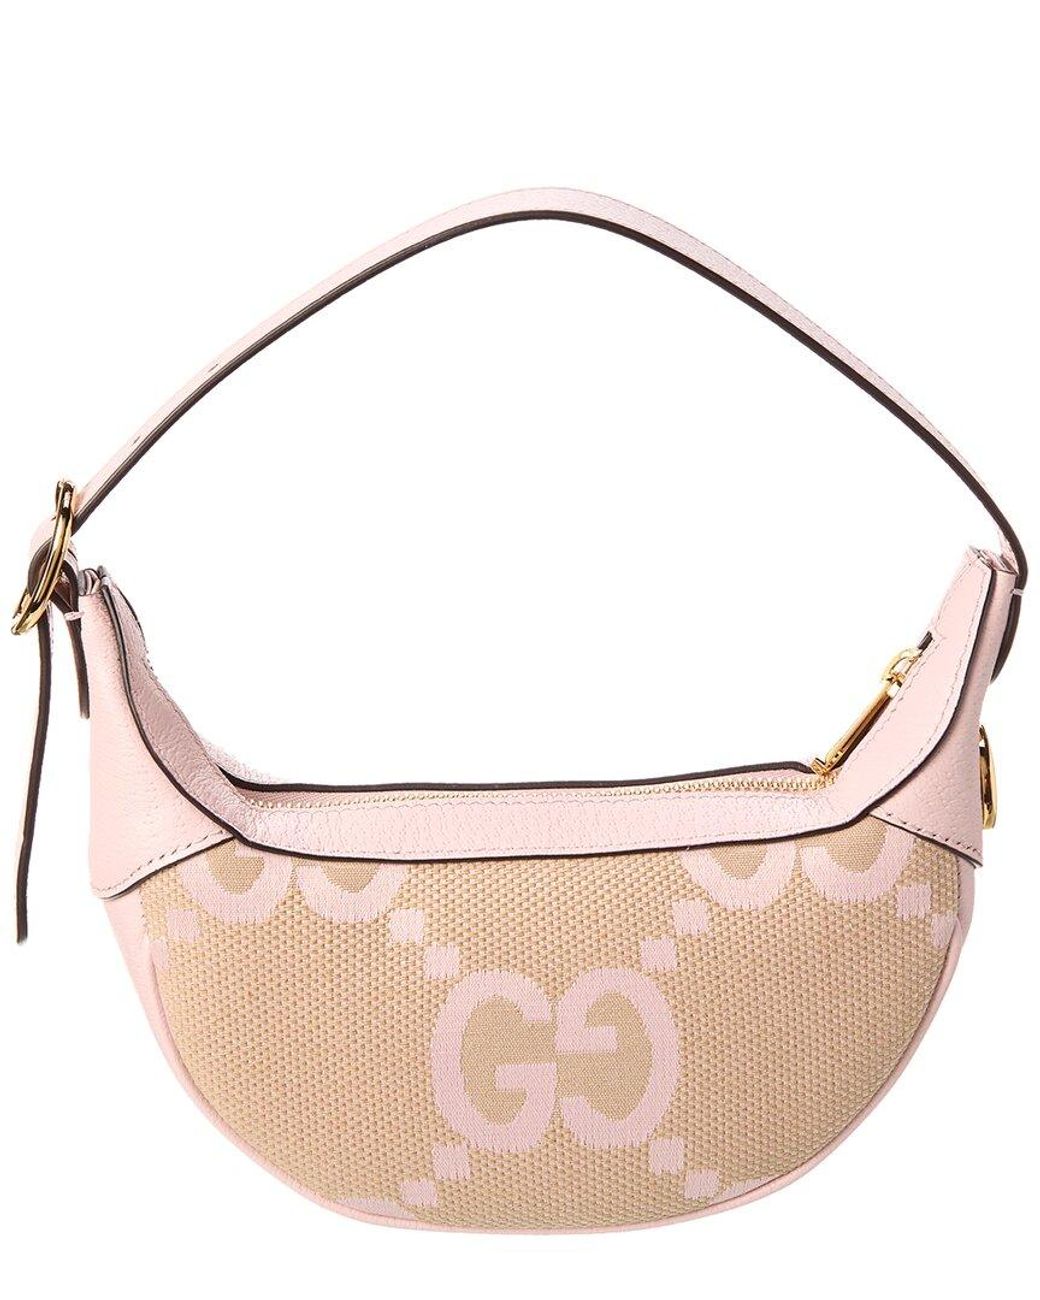 Gucci Ophidia Jumbo GG Small Shoulder Bag Camel/Light Pink in